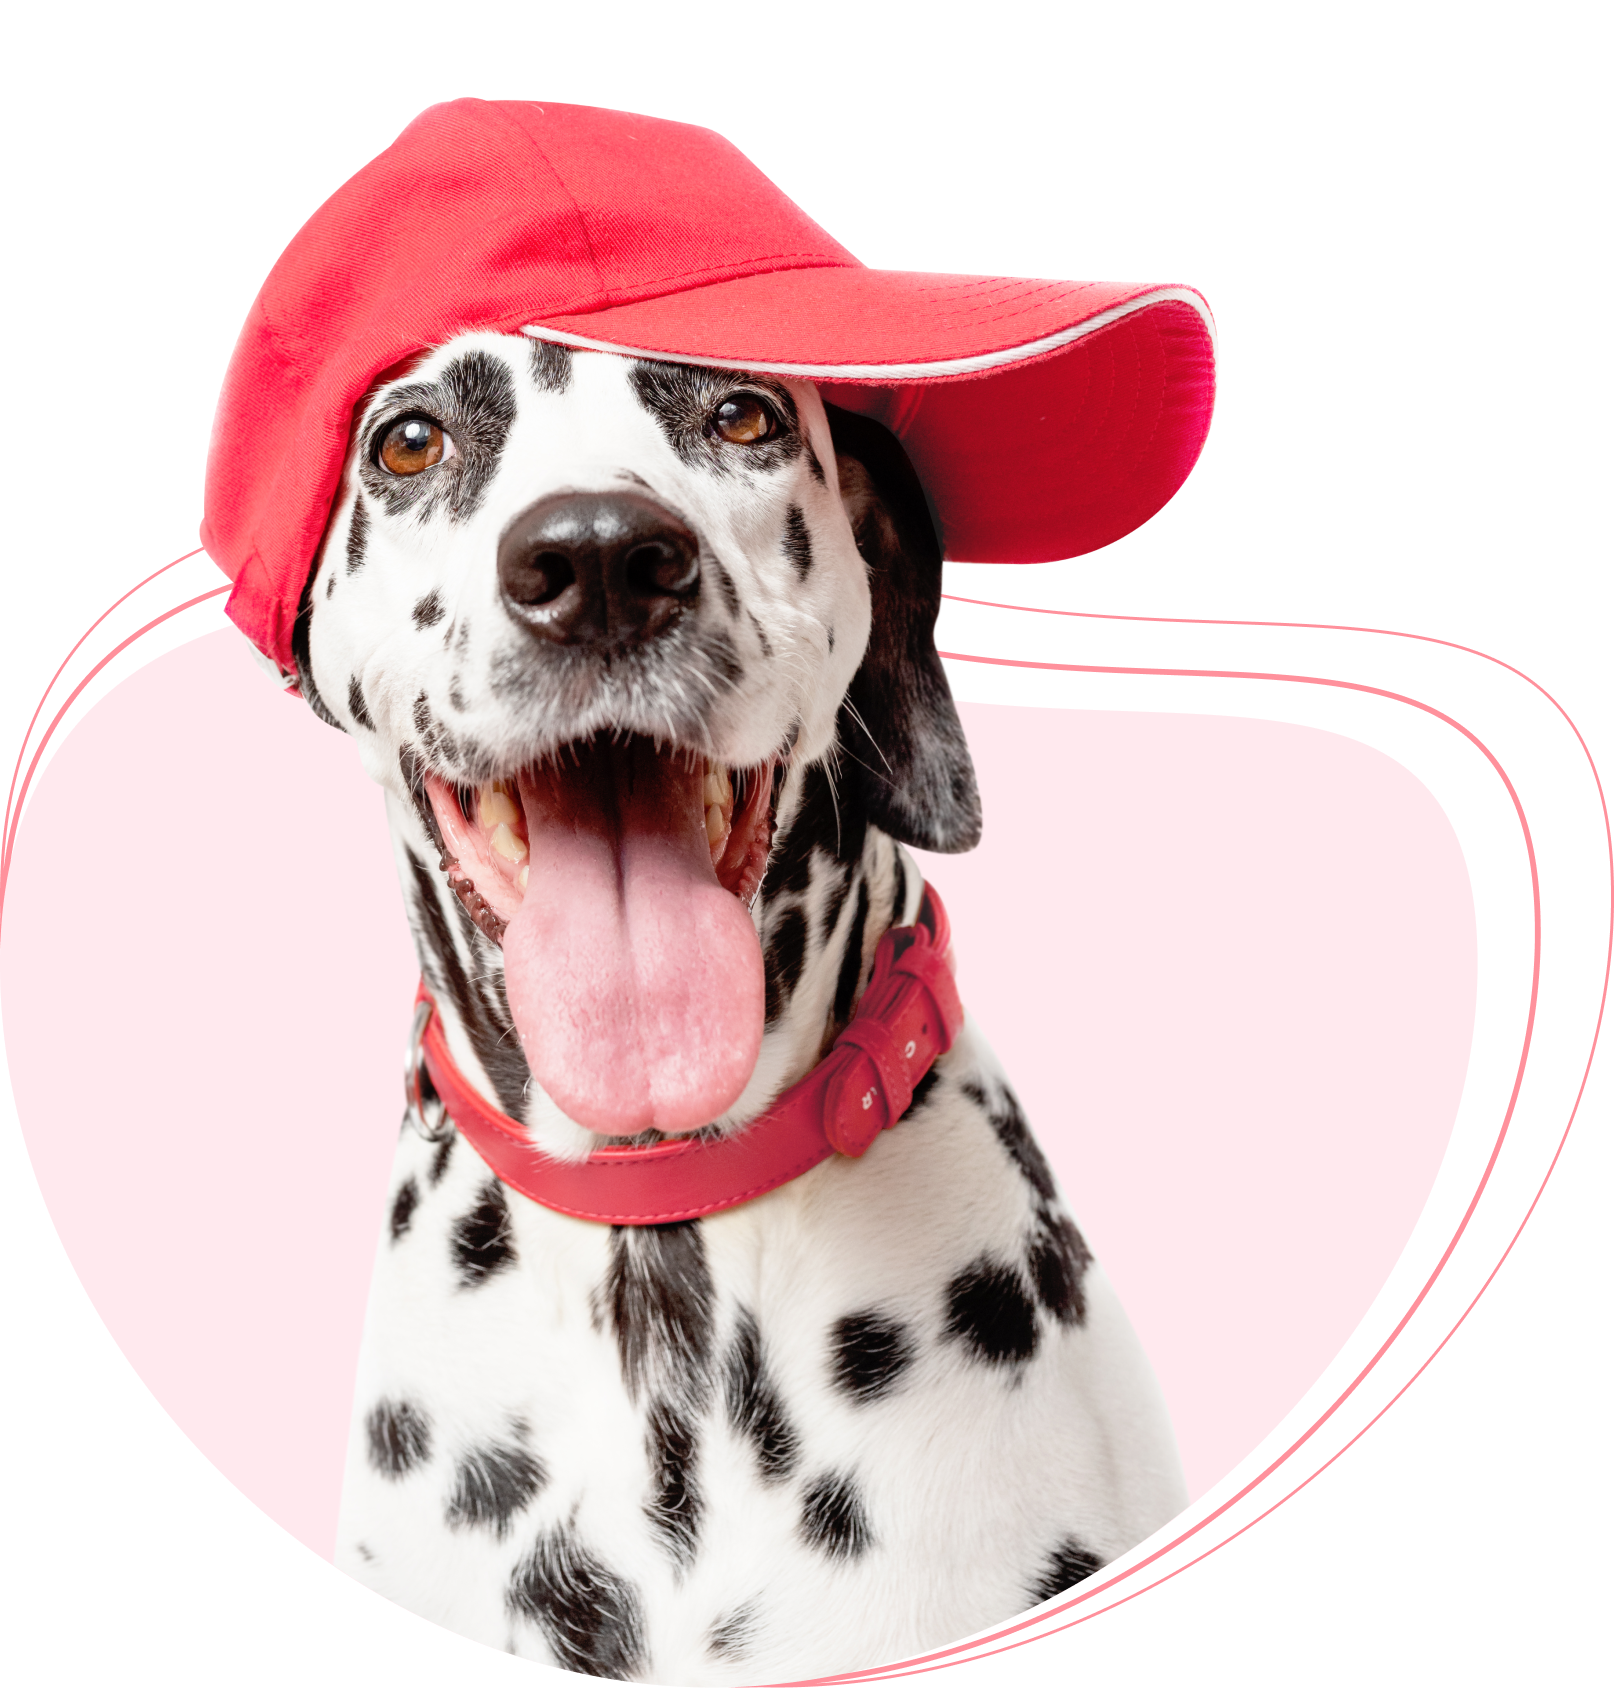 Dog wearing red cap with its tongue out.